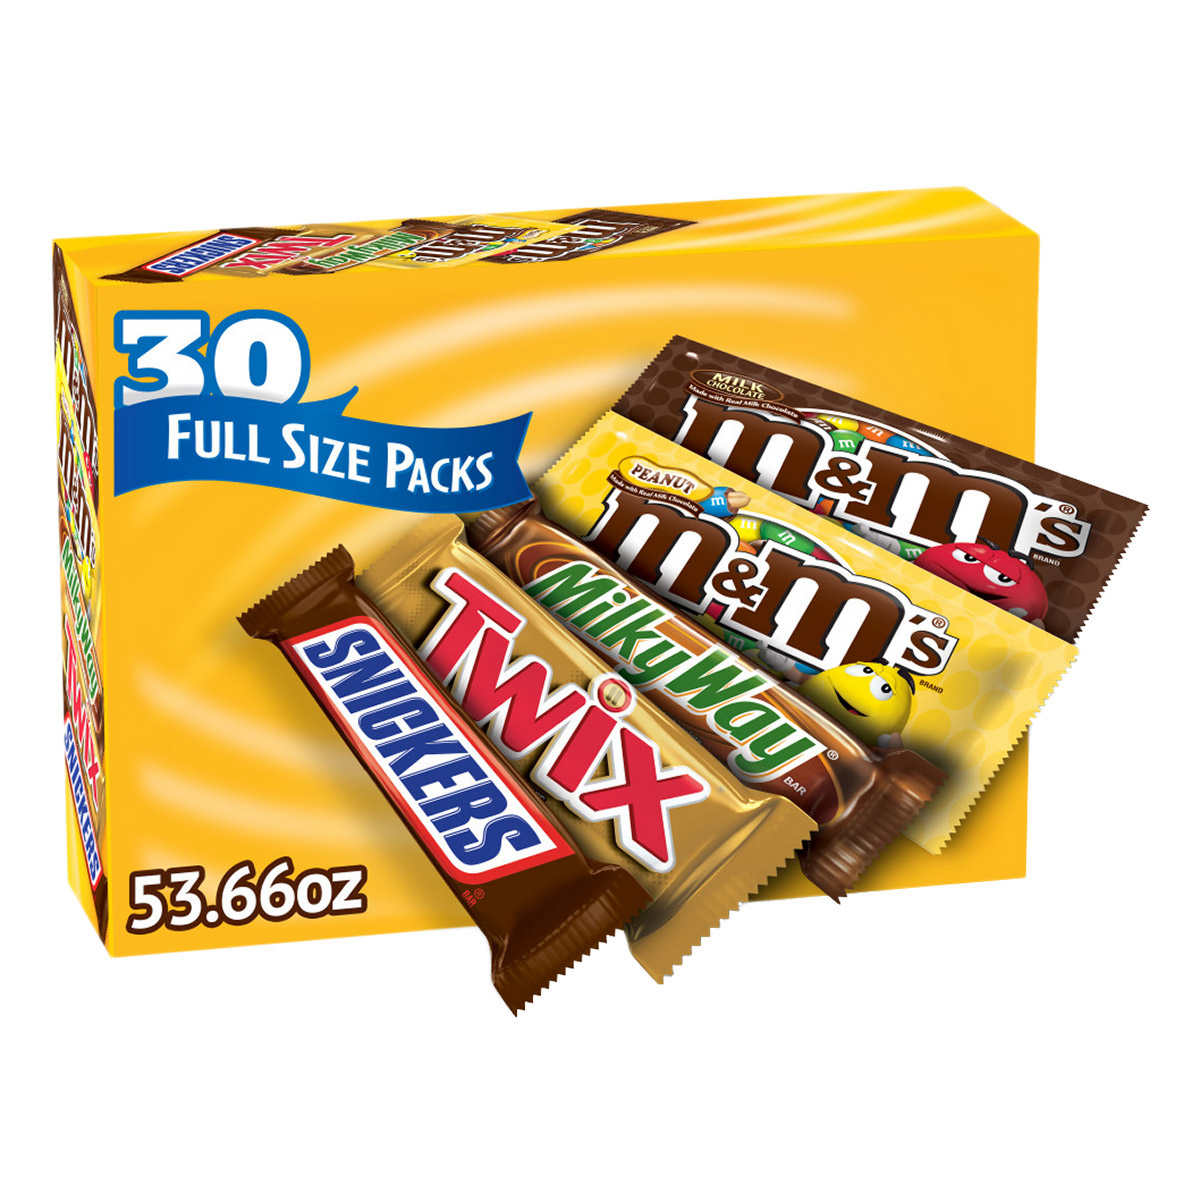 M&M's, Snickers and More Chocolate Candy Bars, Variety Pack